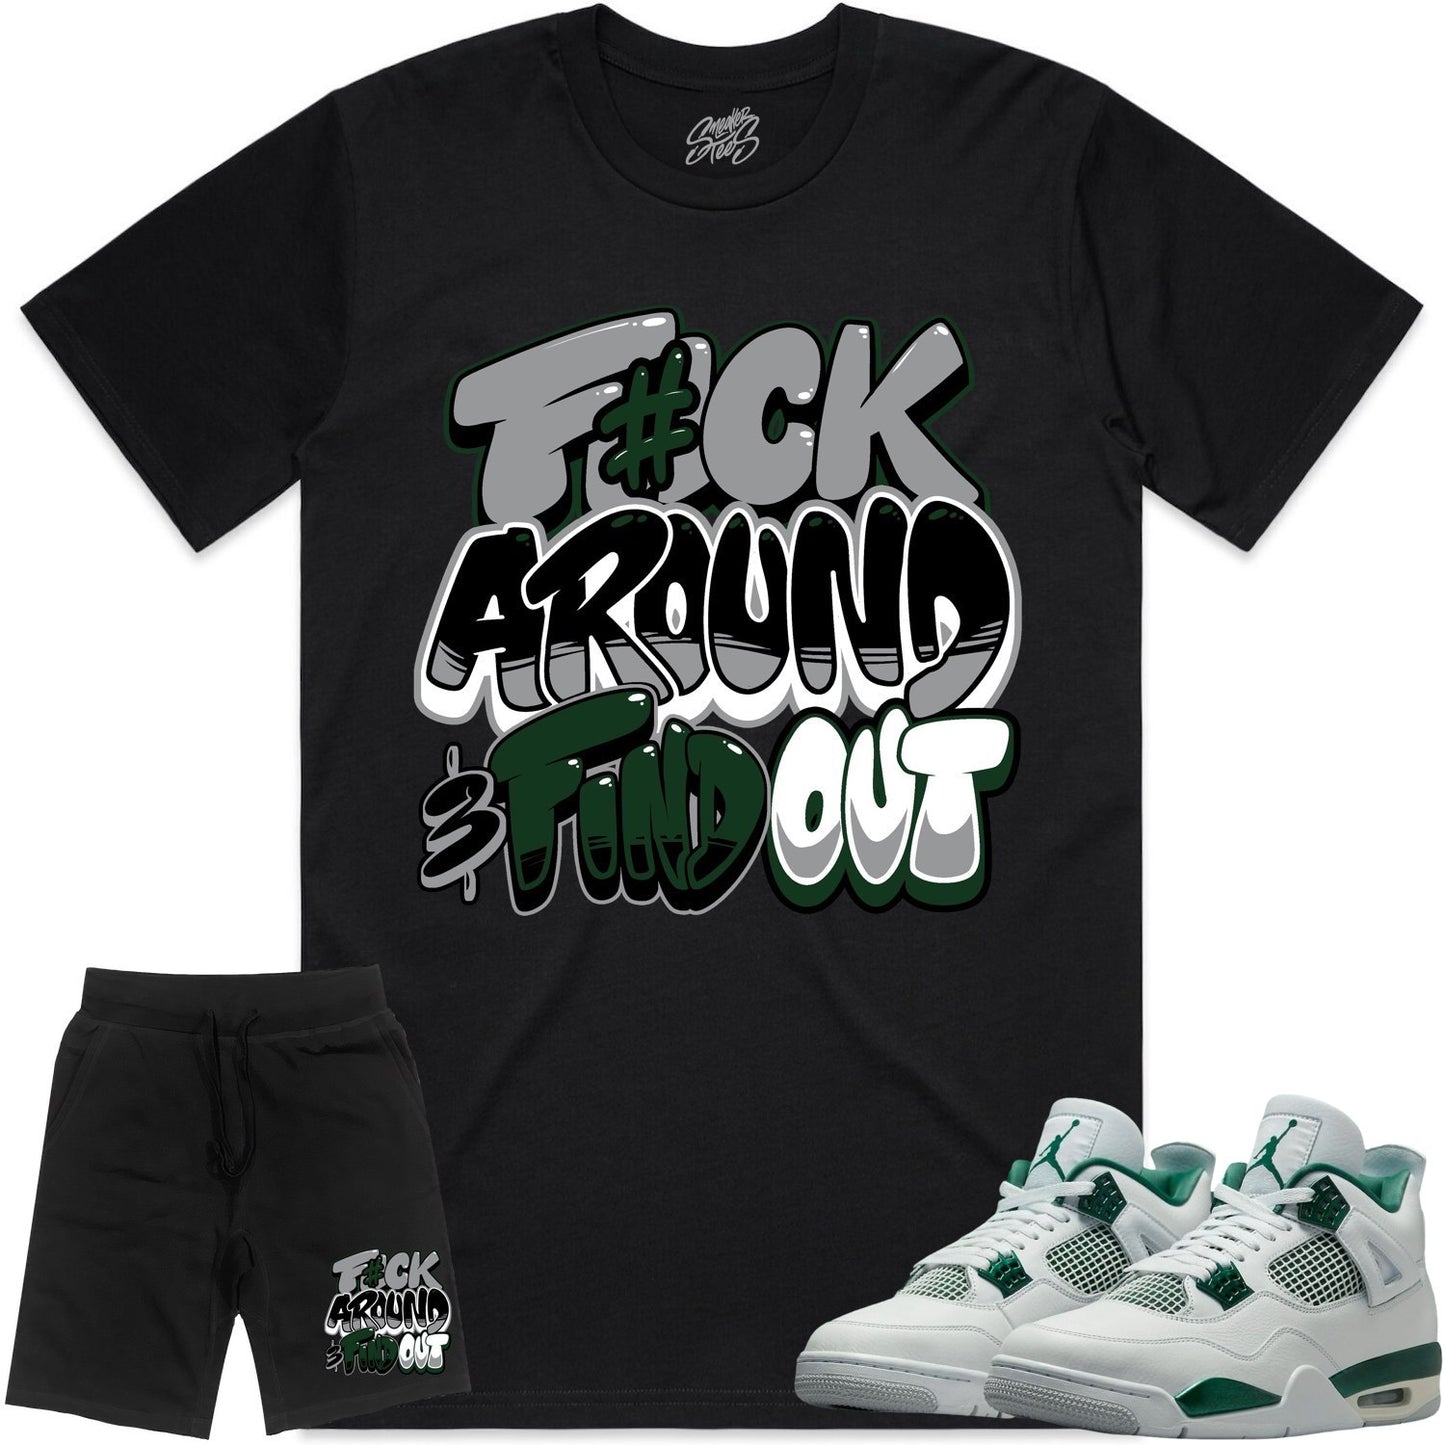 Jordan 4 Oxidized Green 4s Sneaker Outfit - Shorts and Shirt - OXIDIZED GREEN F#CK